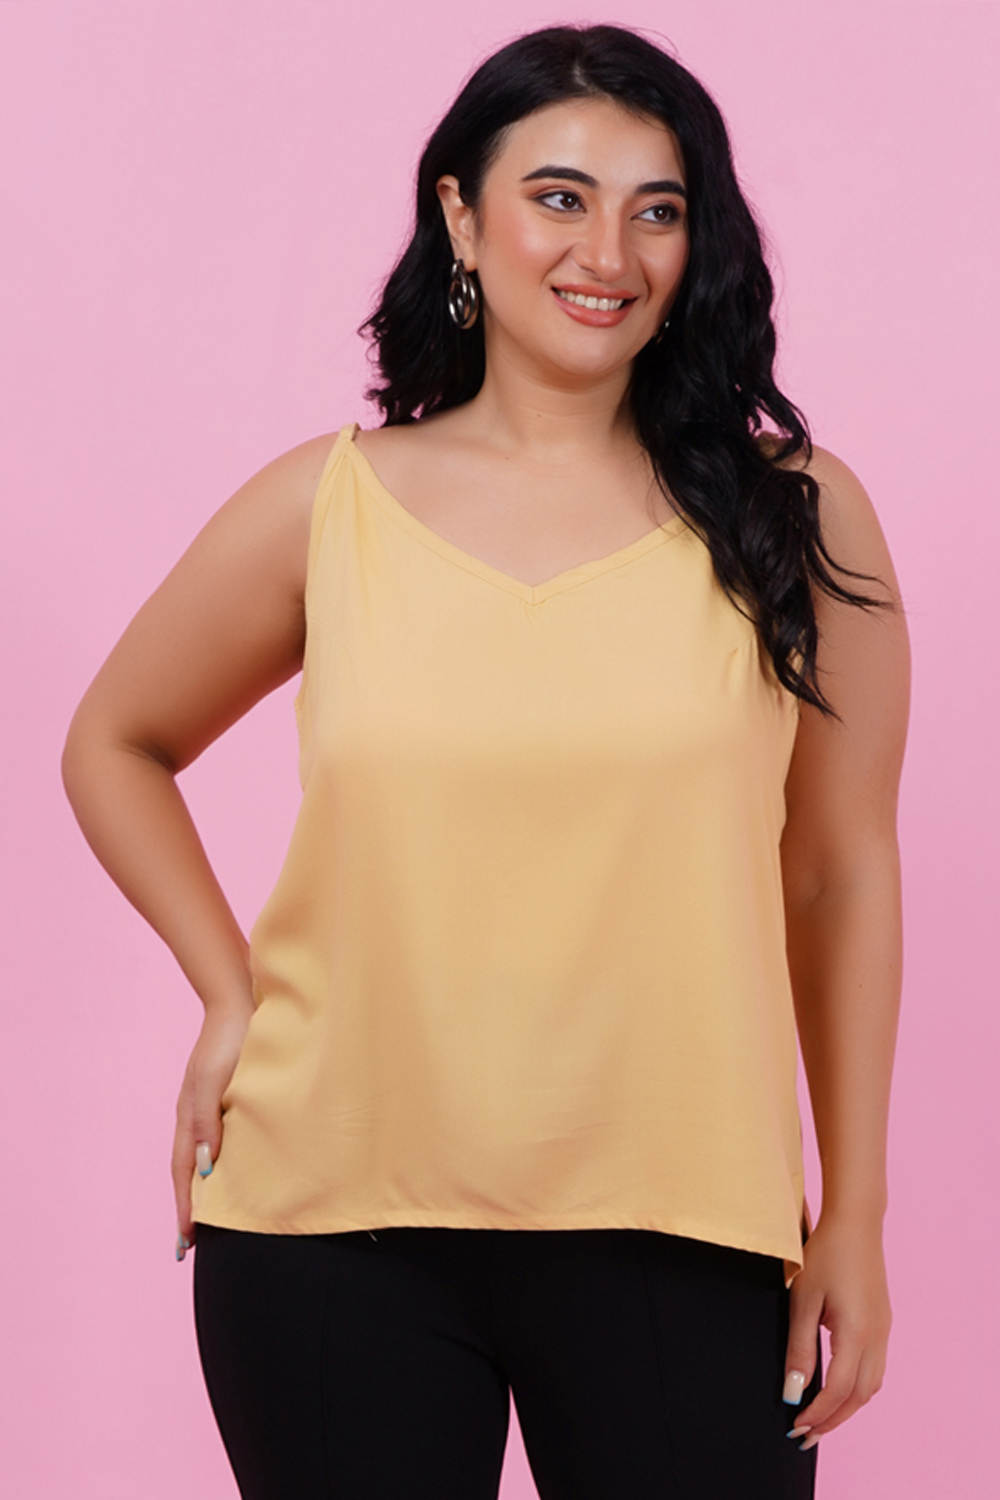 Lastinch Beige T-Shirt Length Camisole, Latest collection